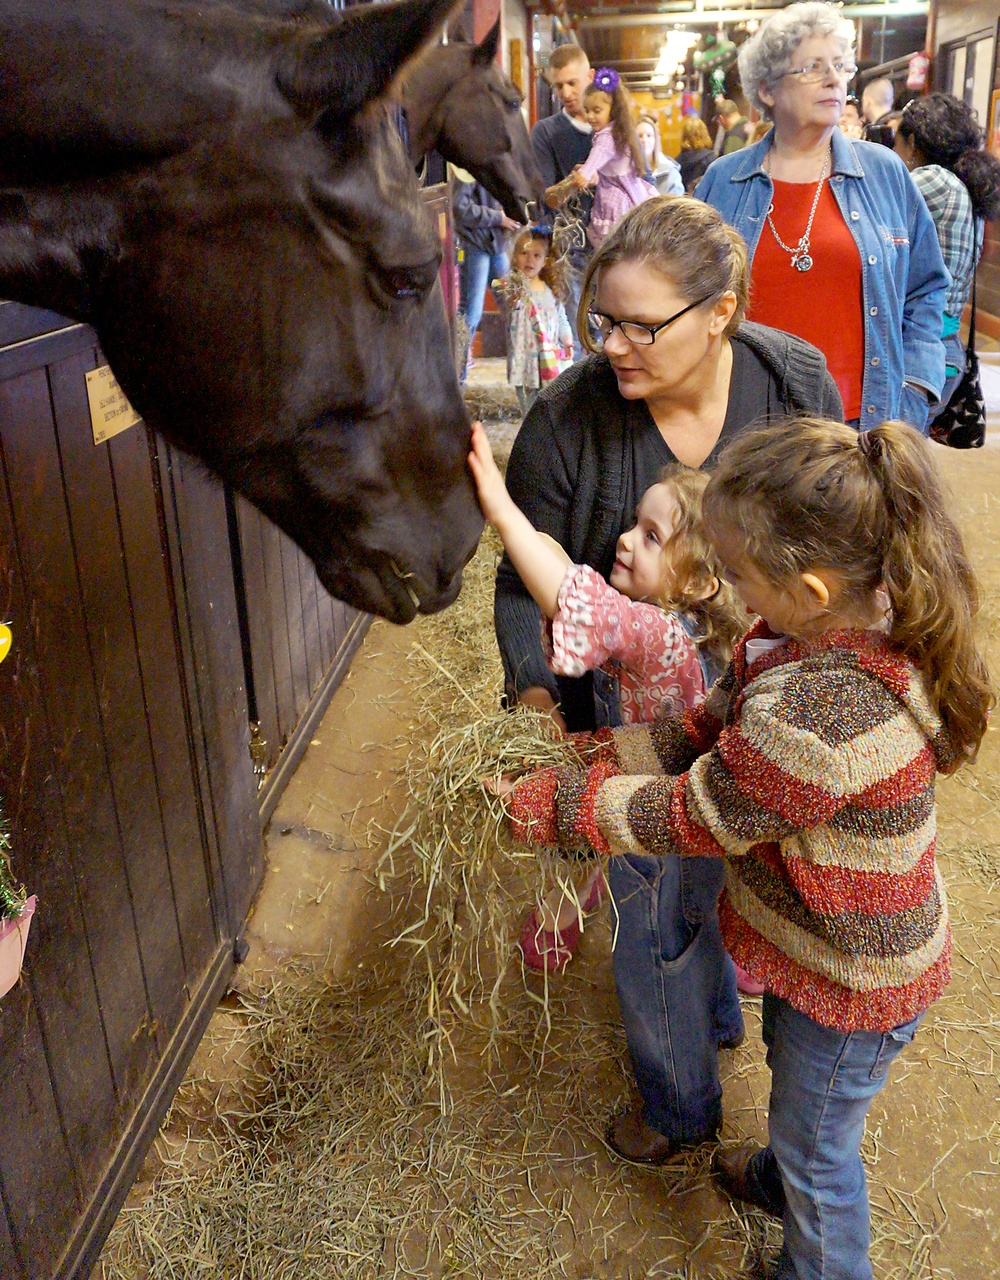 Caisson Spring Open House and Hayride showcases Old Guard mission significance